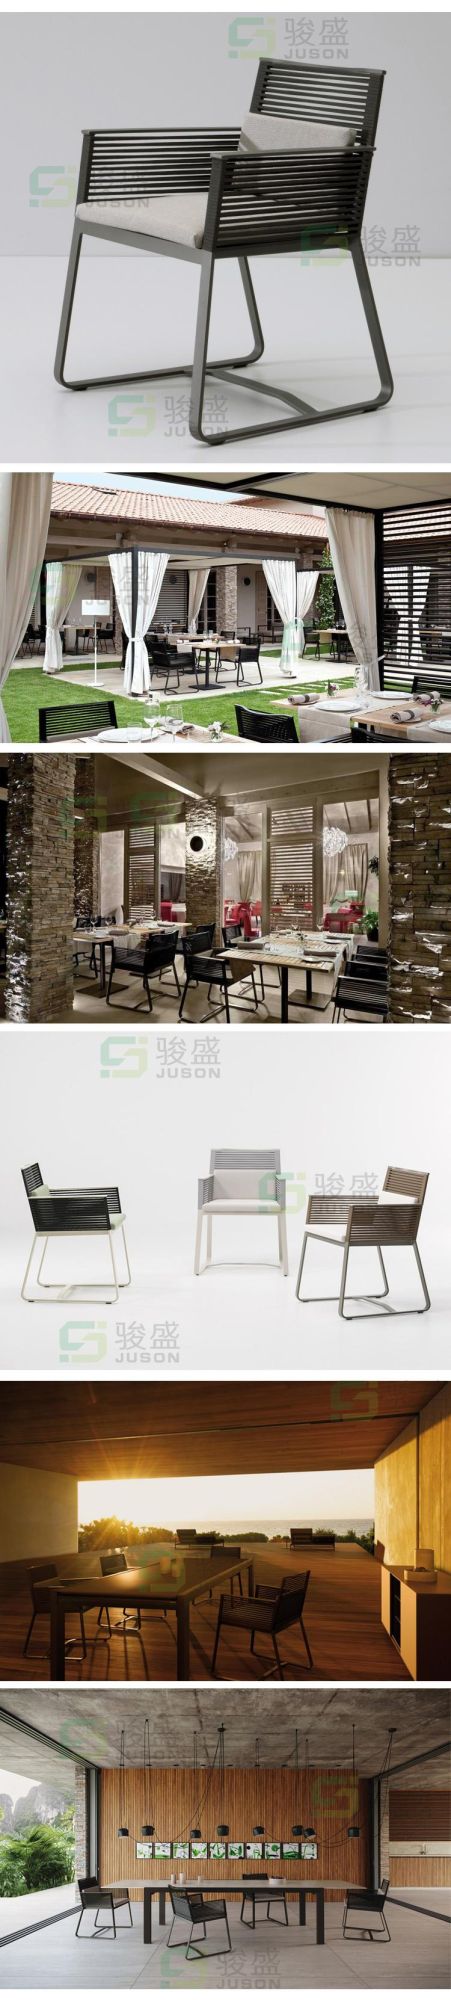 Hot Sale Modern Hotel Furniture Outdoor furniture Patio Dining Table Set Rattan Garden Set Living Room Dining Chair